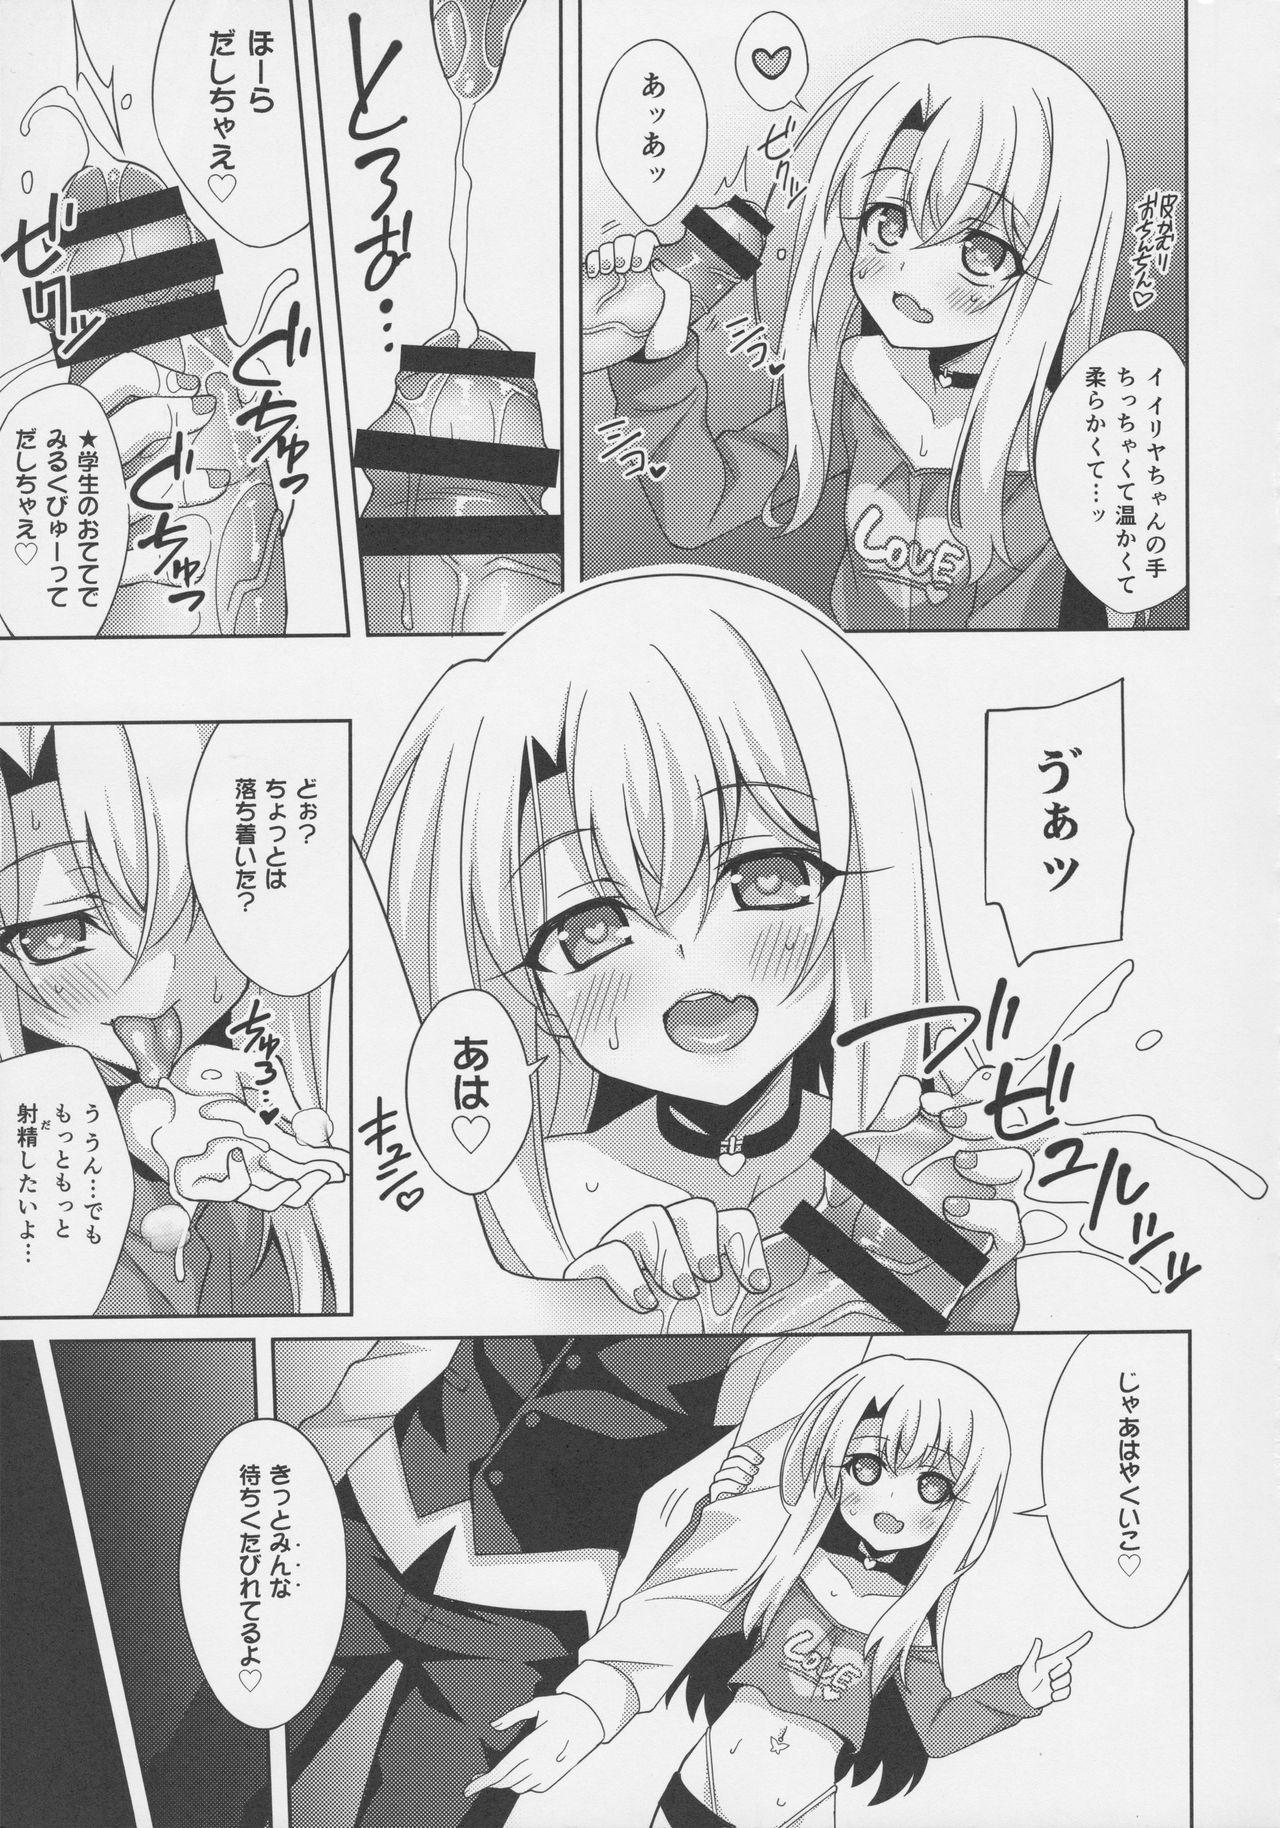 Smooth Illya-chan no Dosukebe Suppox - Fate grand order Gay Blondhair - Page 6